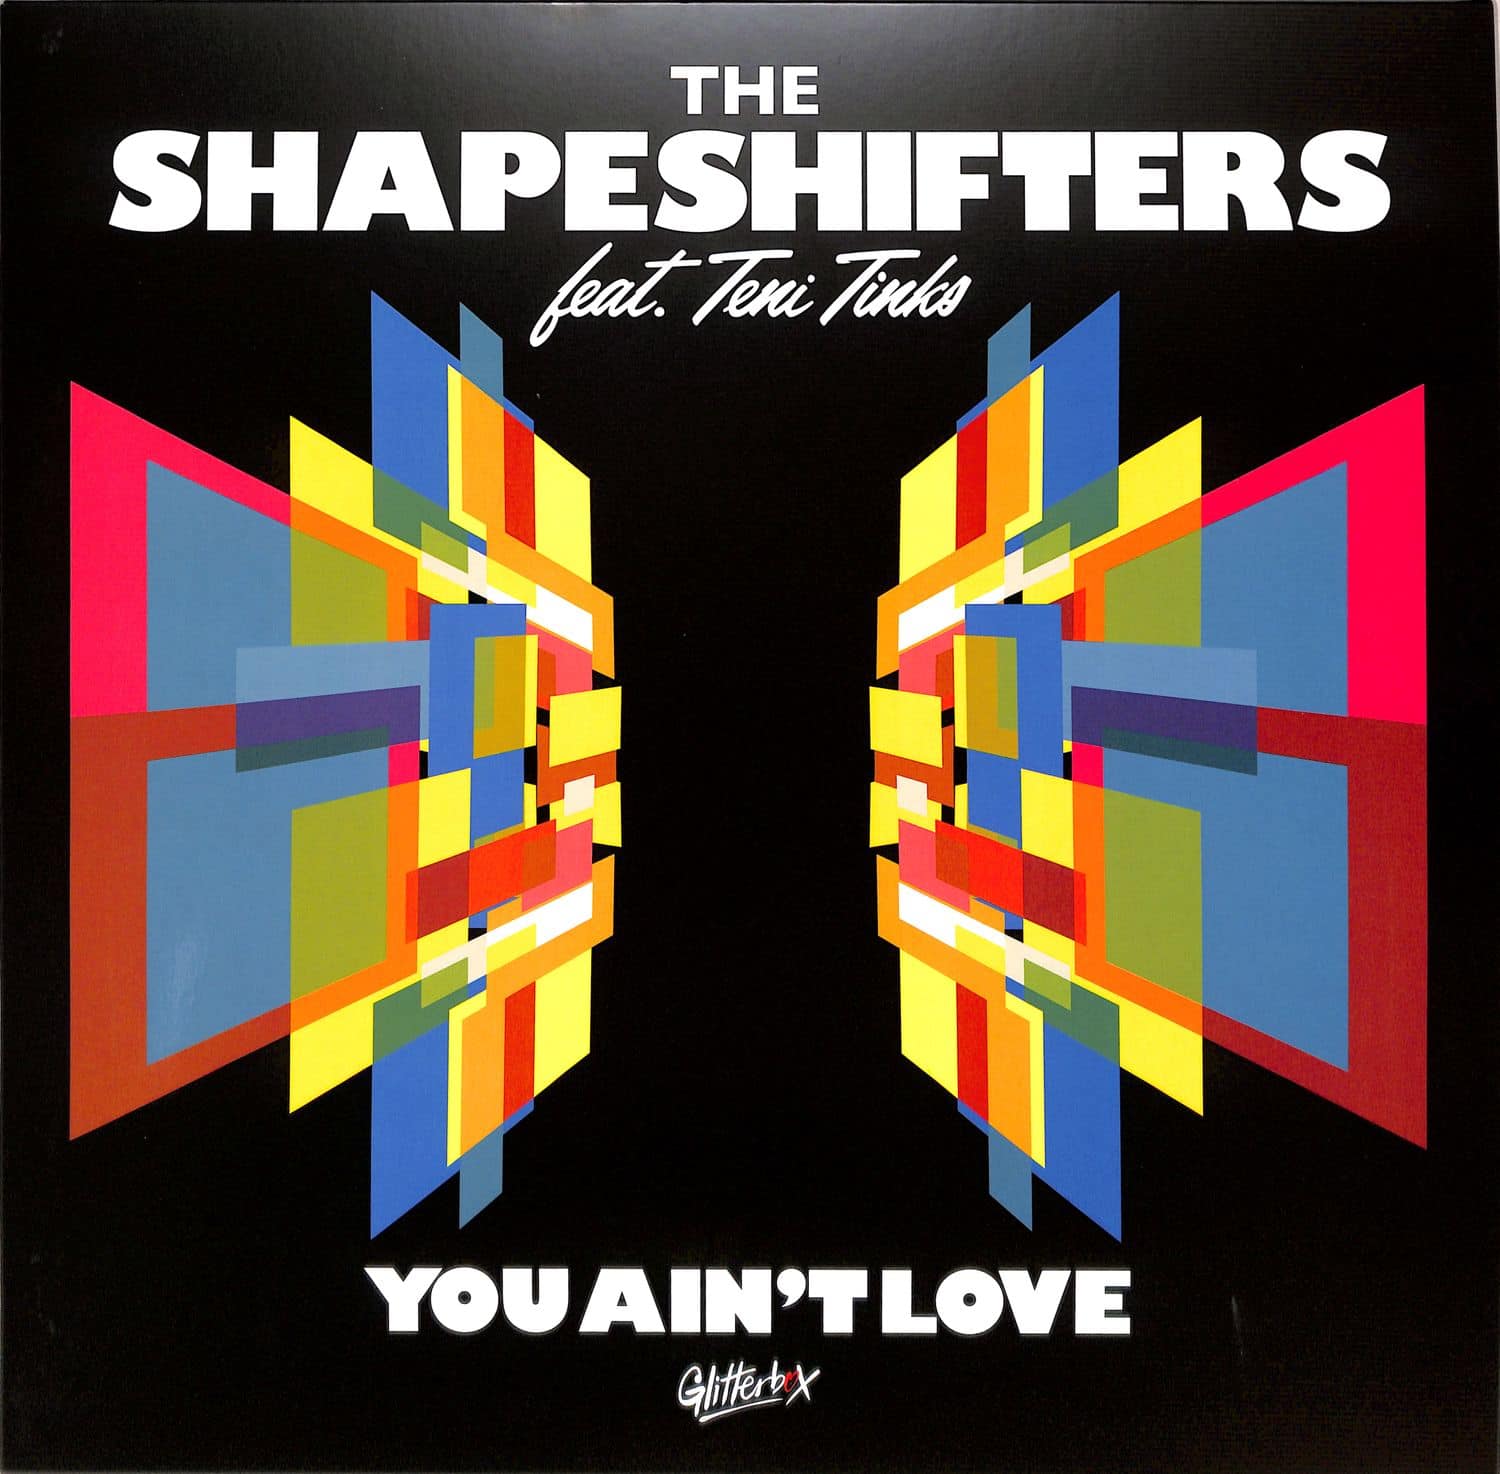 The Shapeshifters featuring Teni Tinks - YOU AINT LOVE